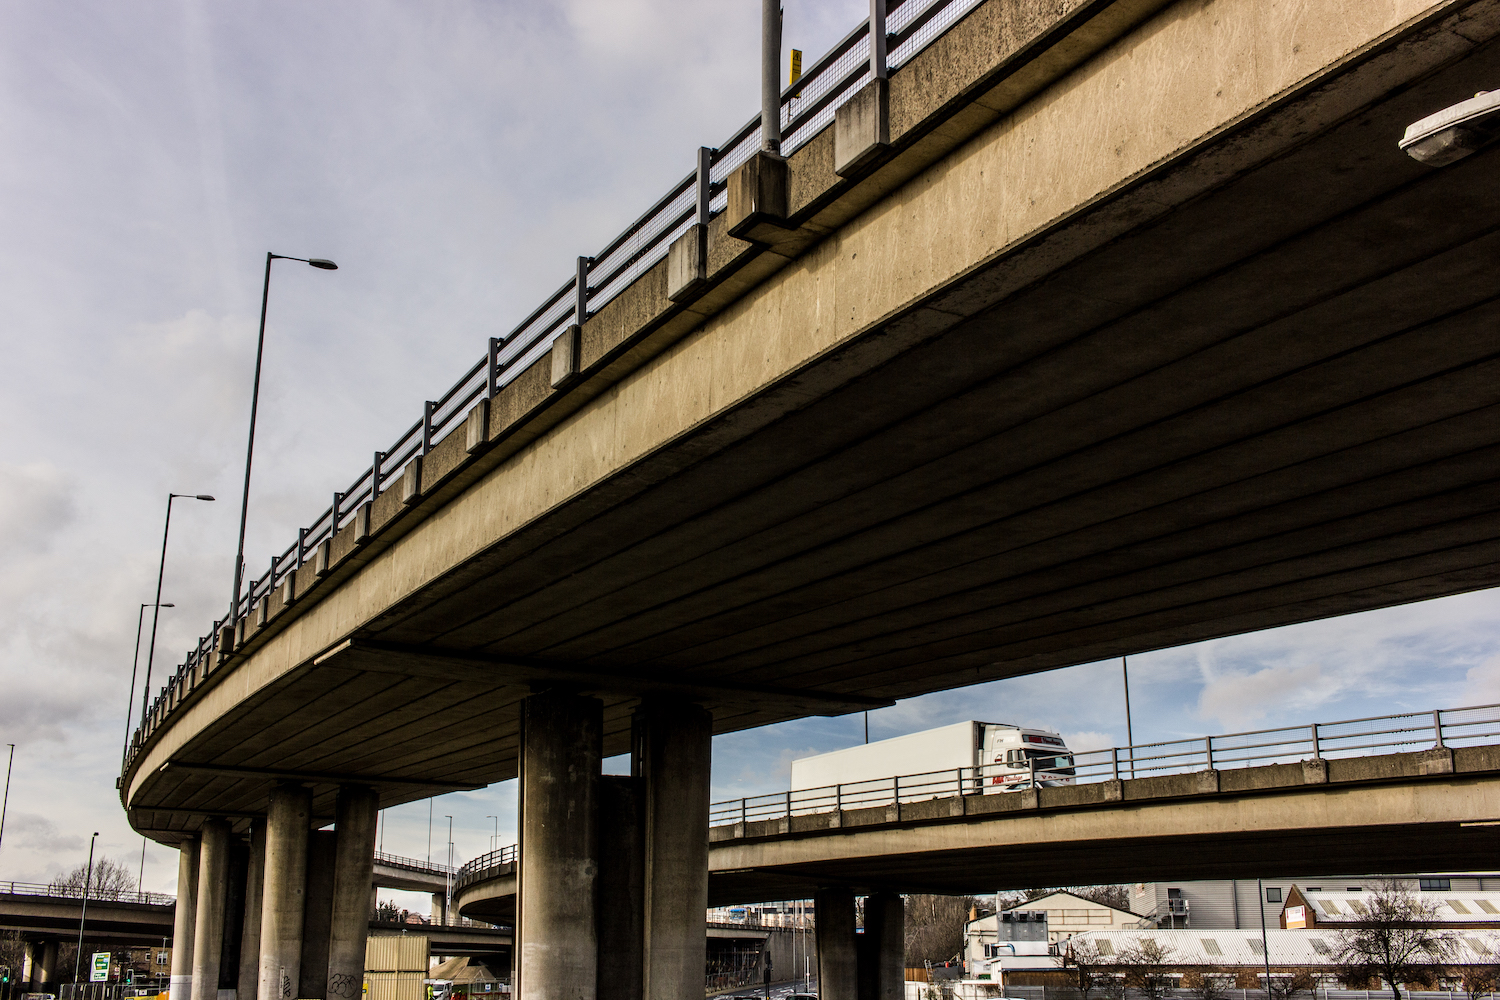 Professional Photography Concrete Roundabout In South Woodford North East London With Two Overpasses And Truck